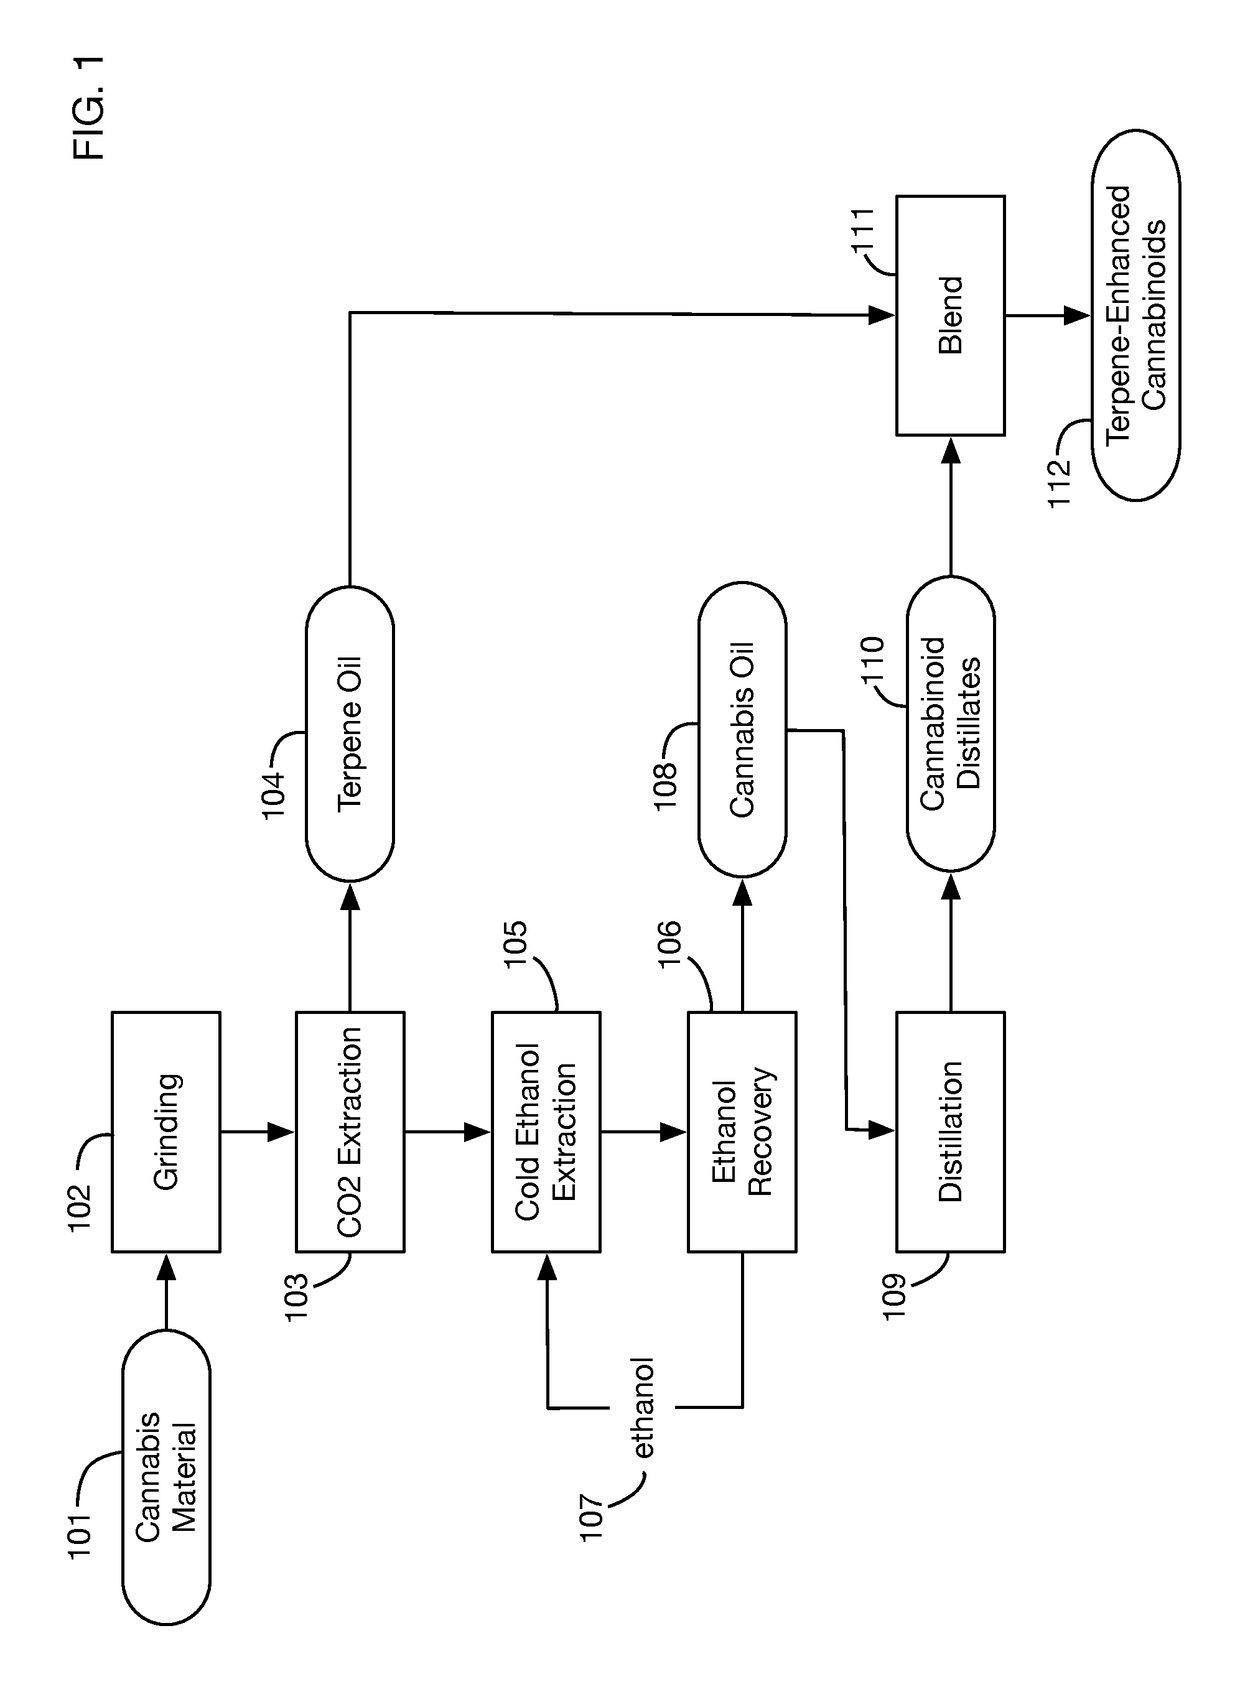 System for producing a terpene-enhanced cannabinoid concentrate